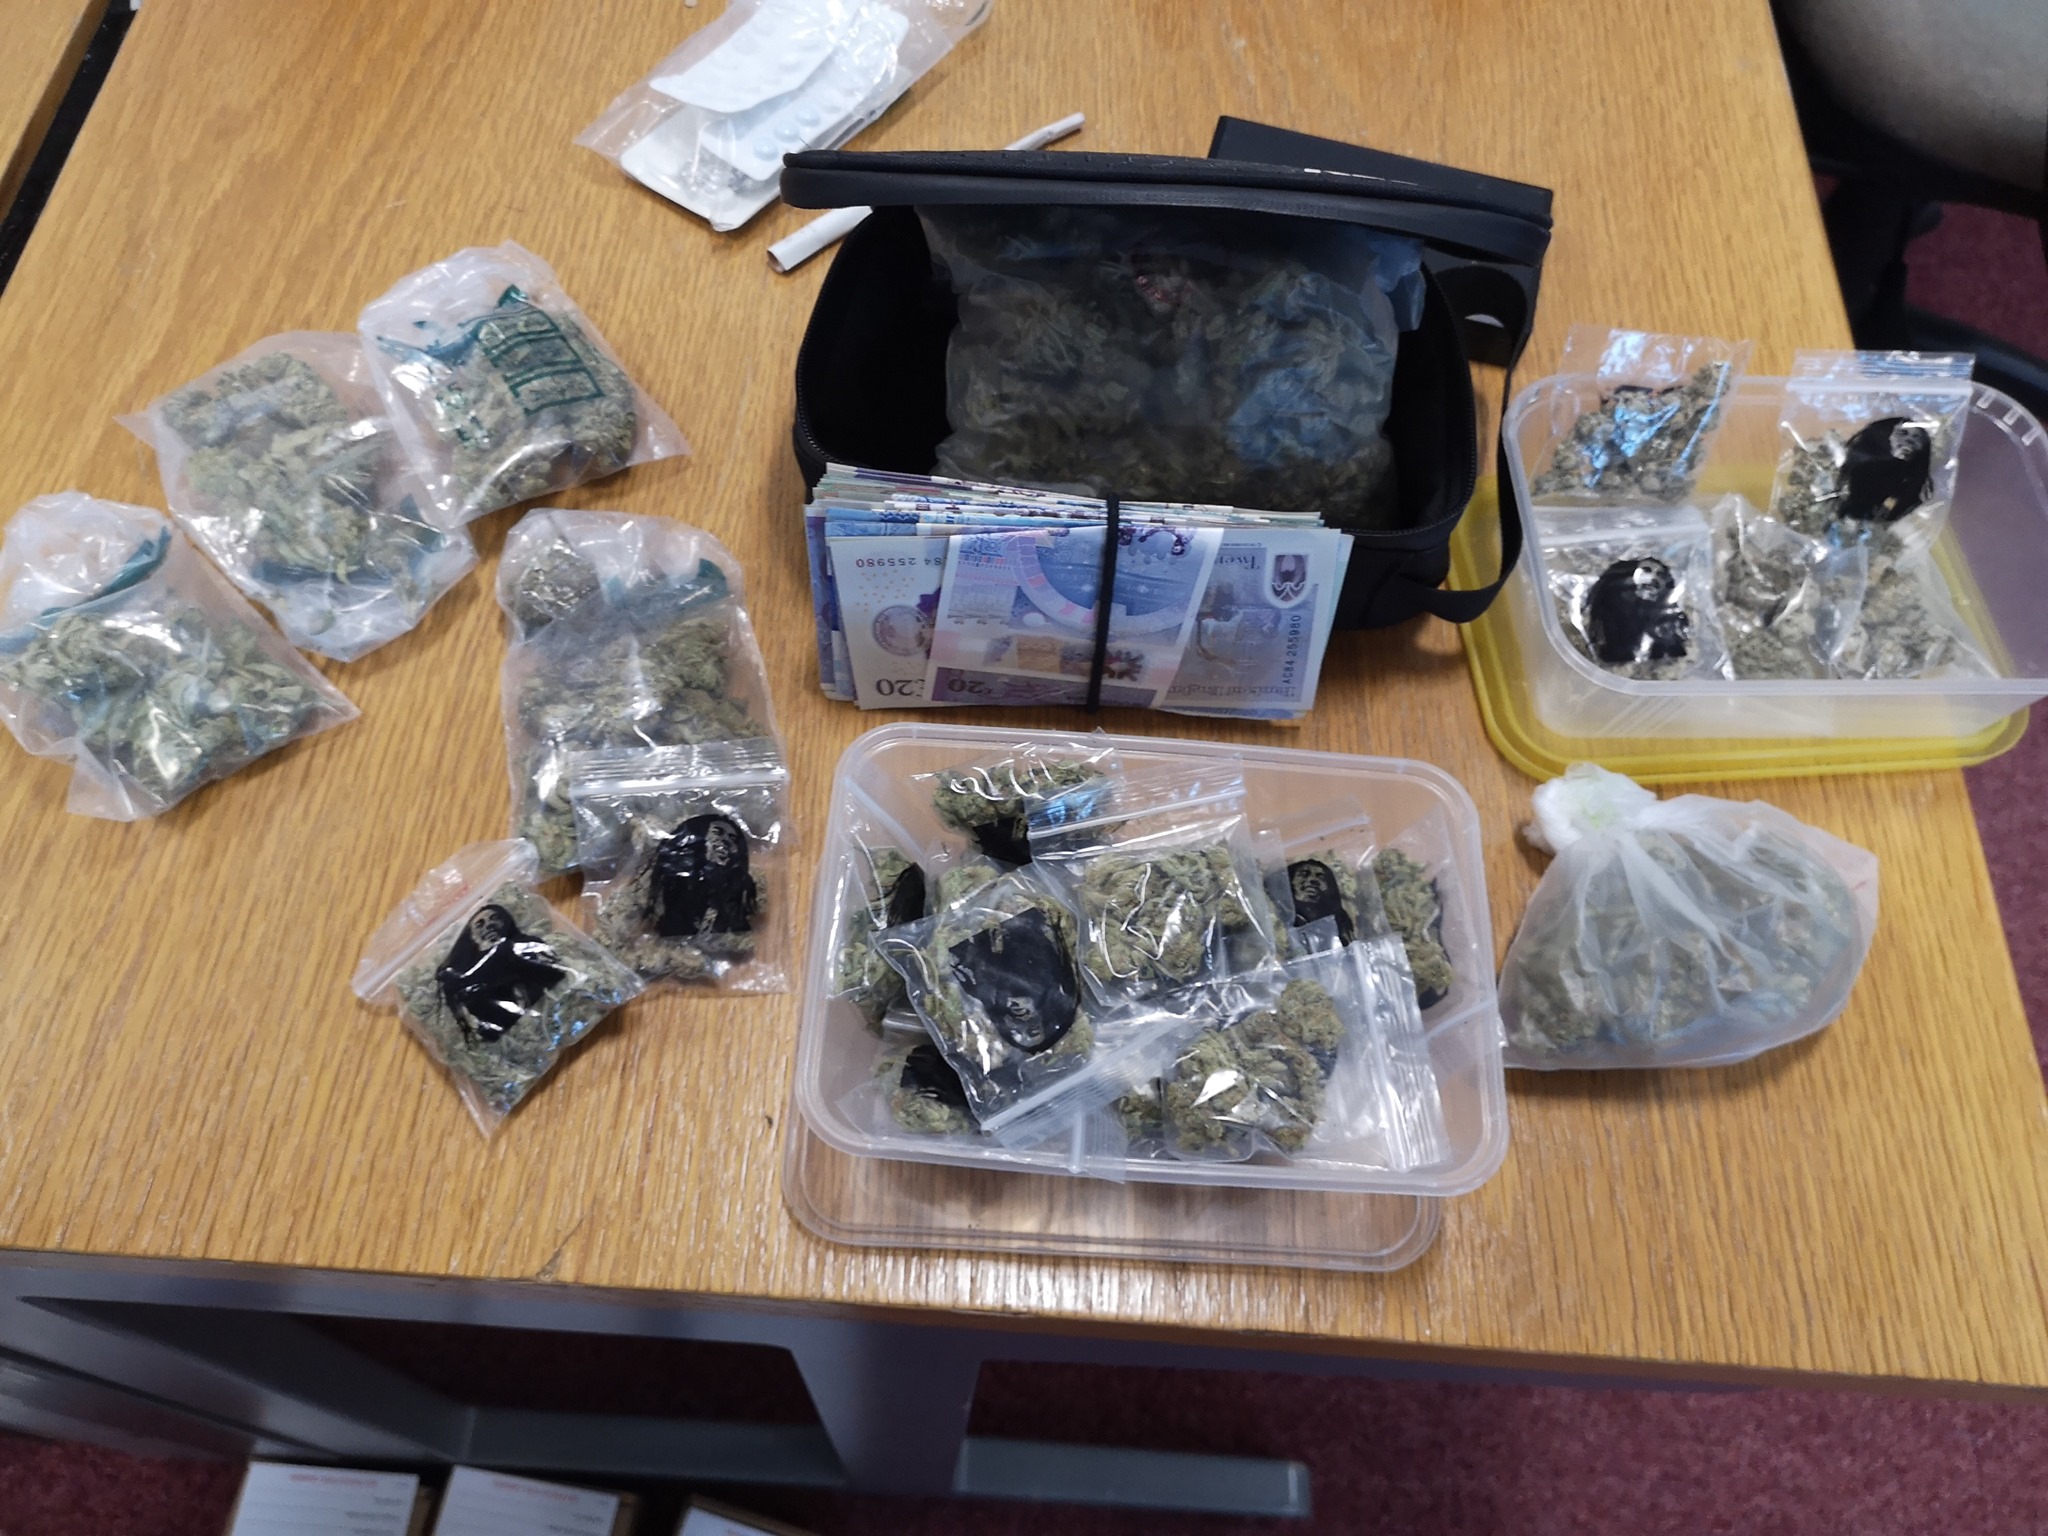 Two arrested after drugs seized in Omagh